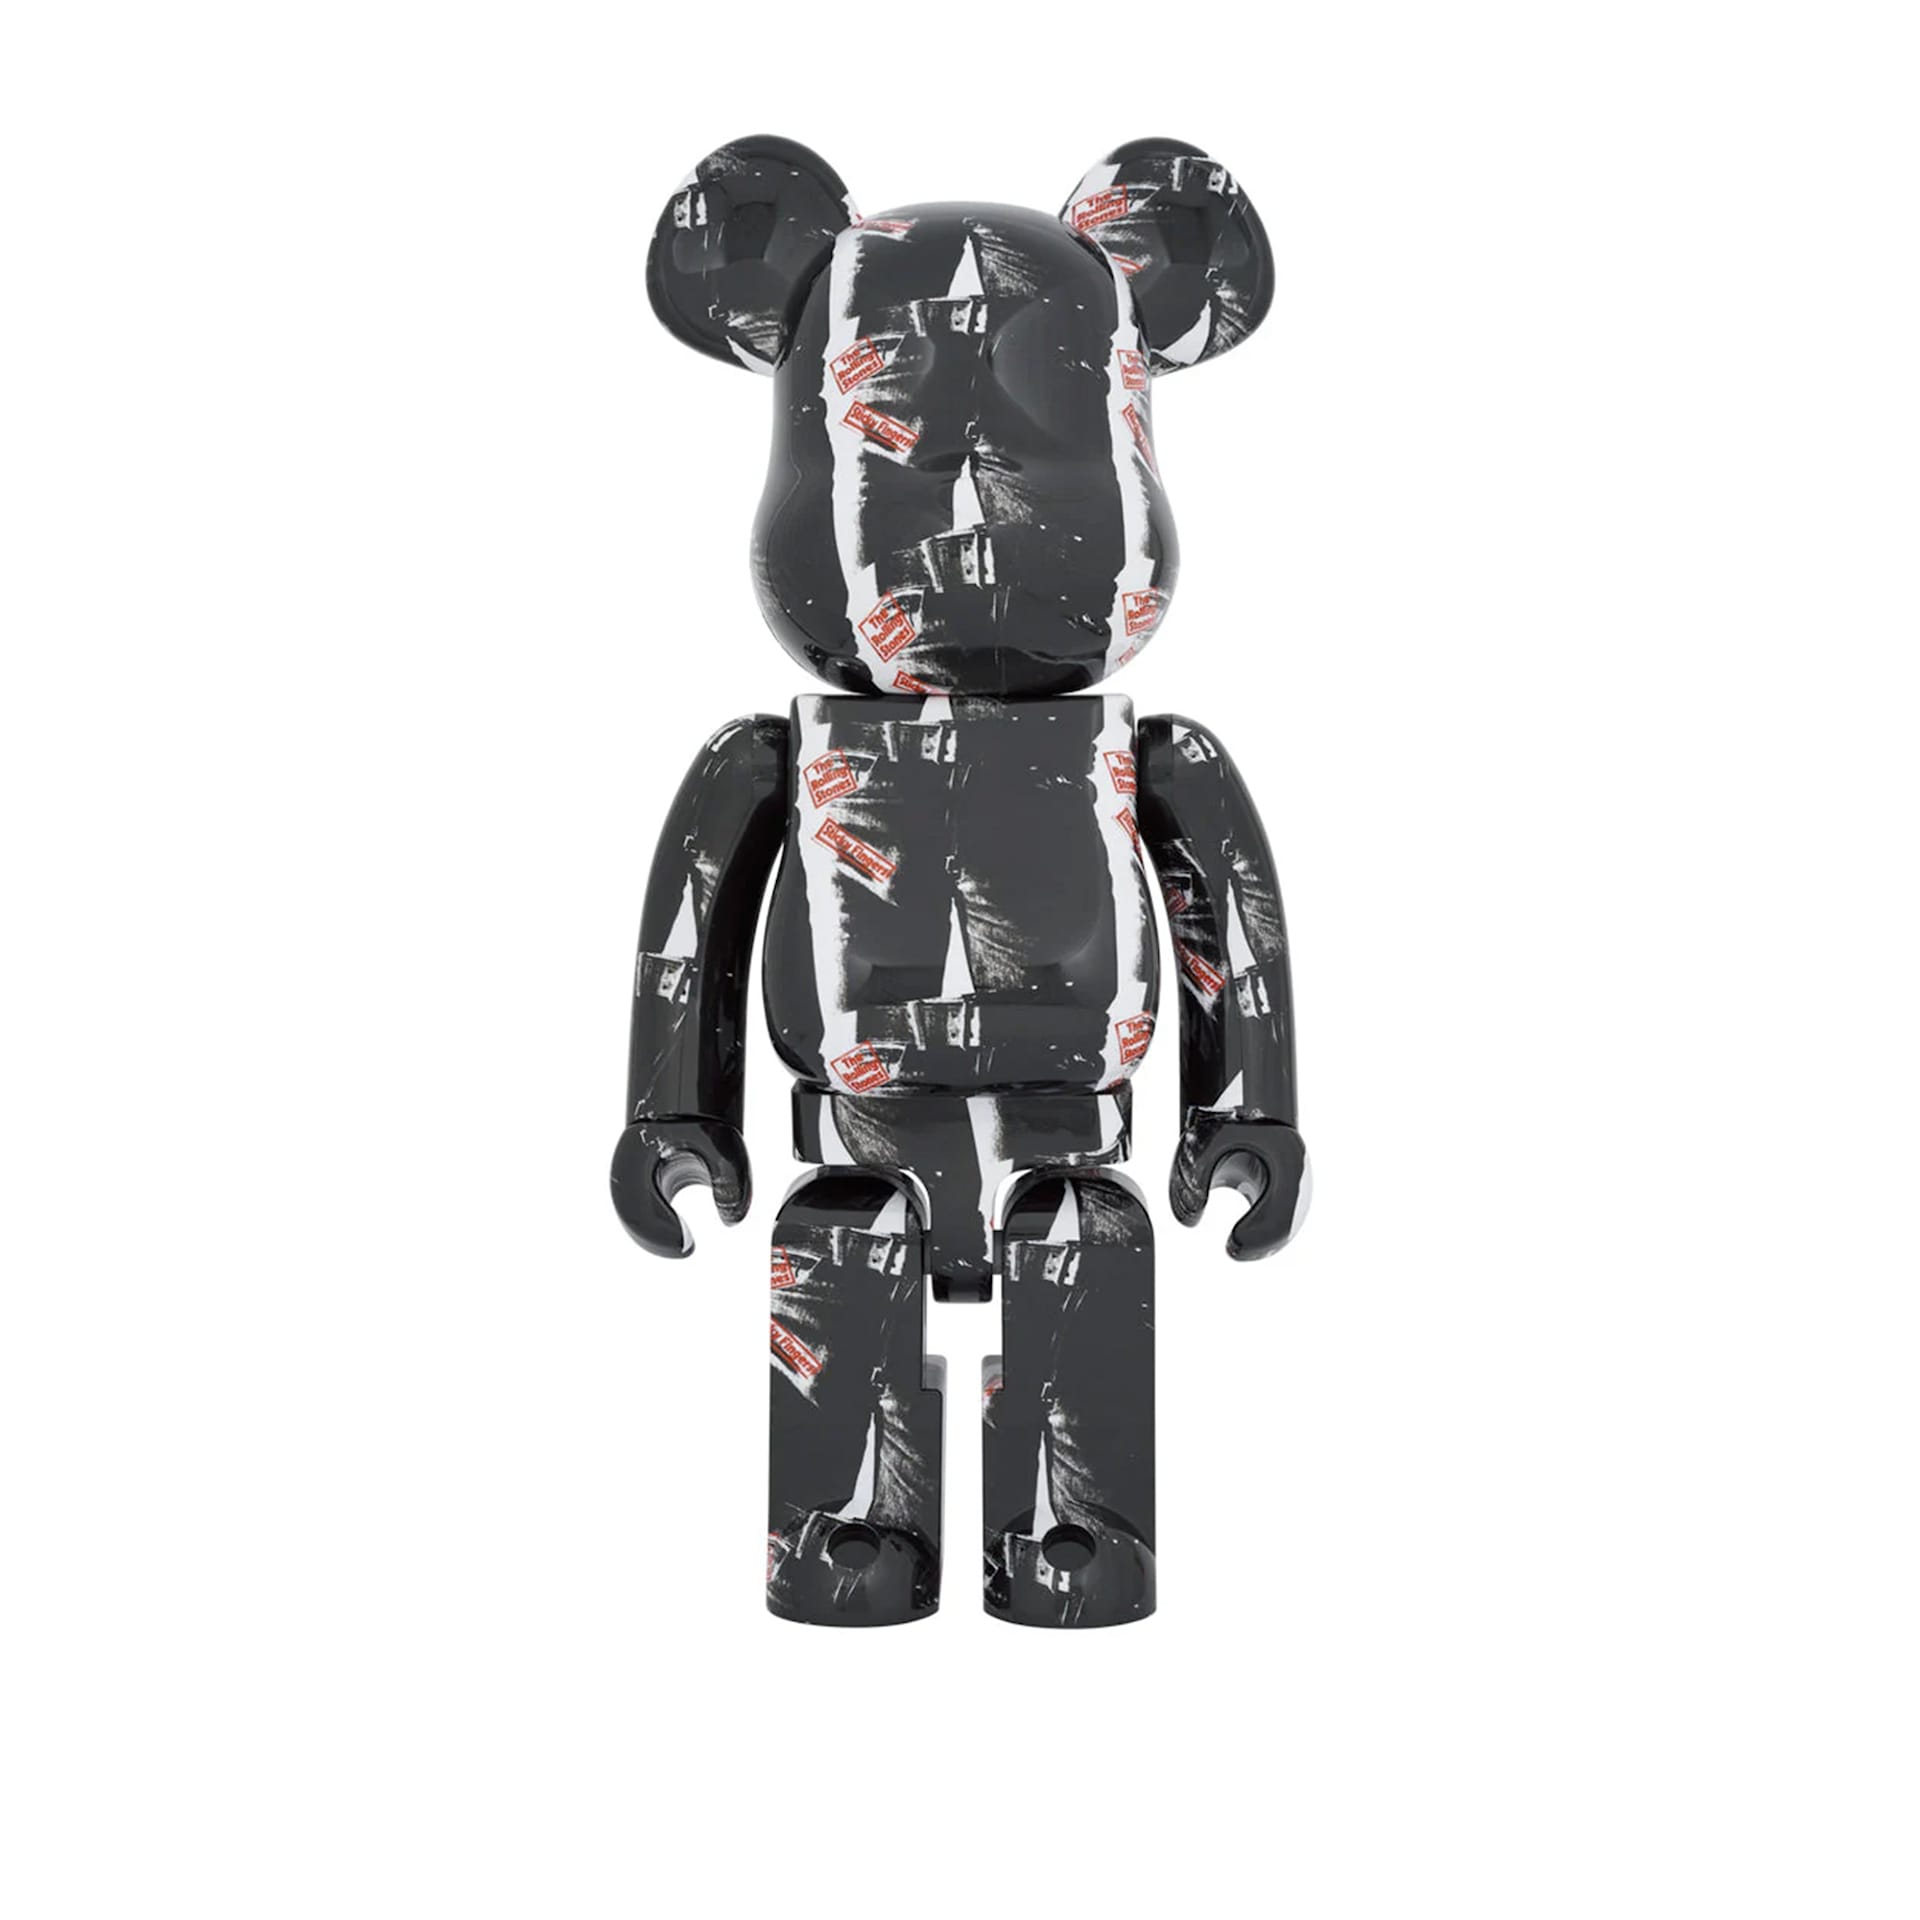 BE@RBRICK Andy Warhol × The Rolling Stones Sticky Fingers 1000% - Medicom Toy - NO GA